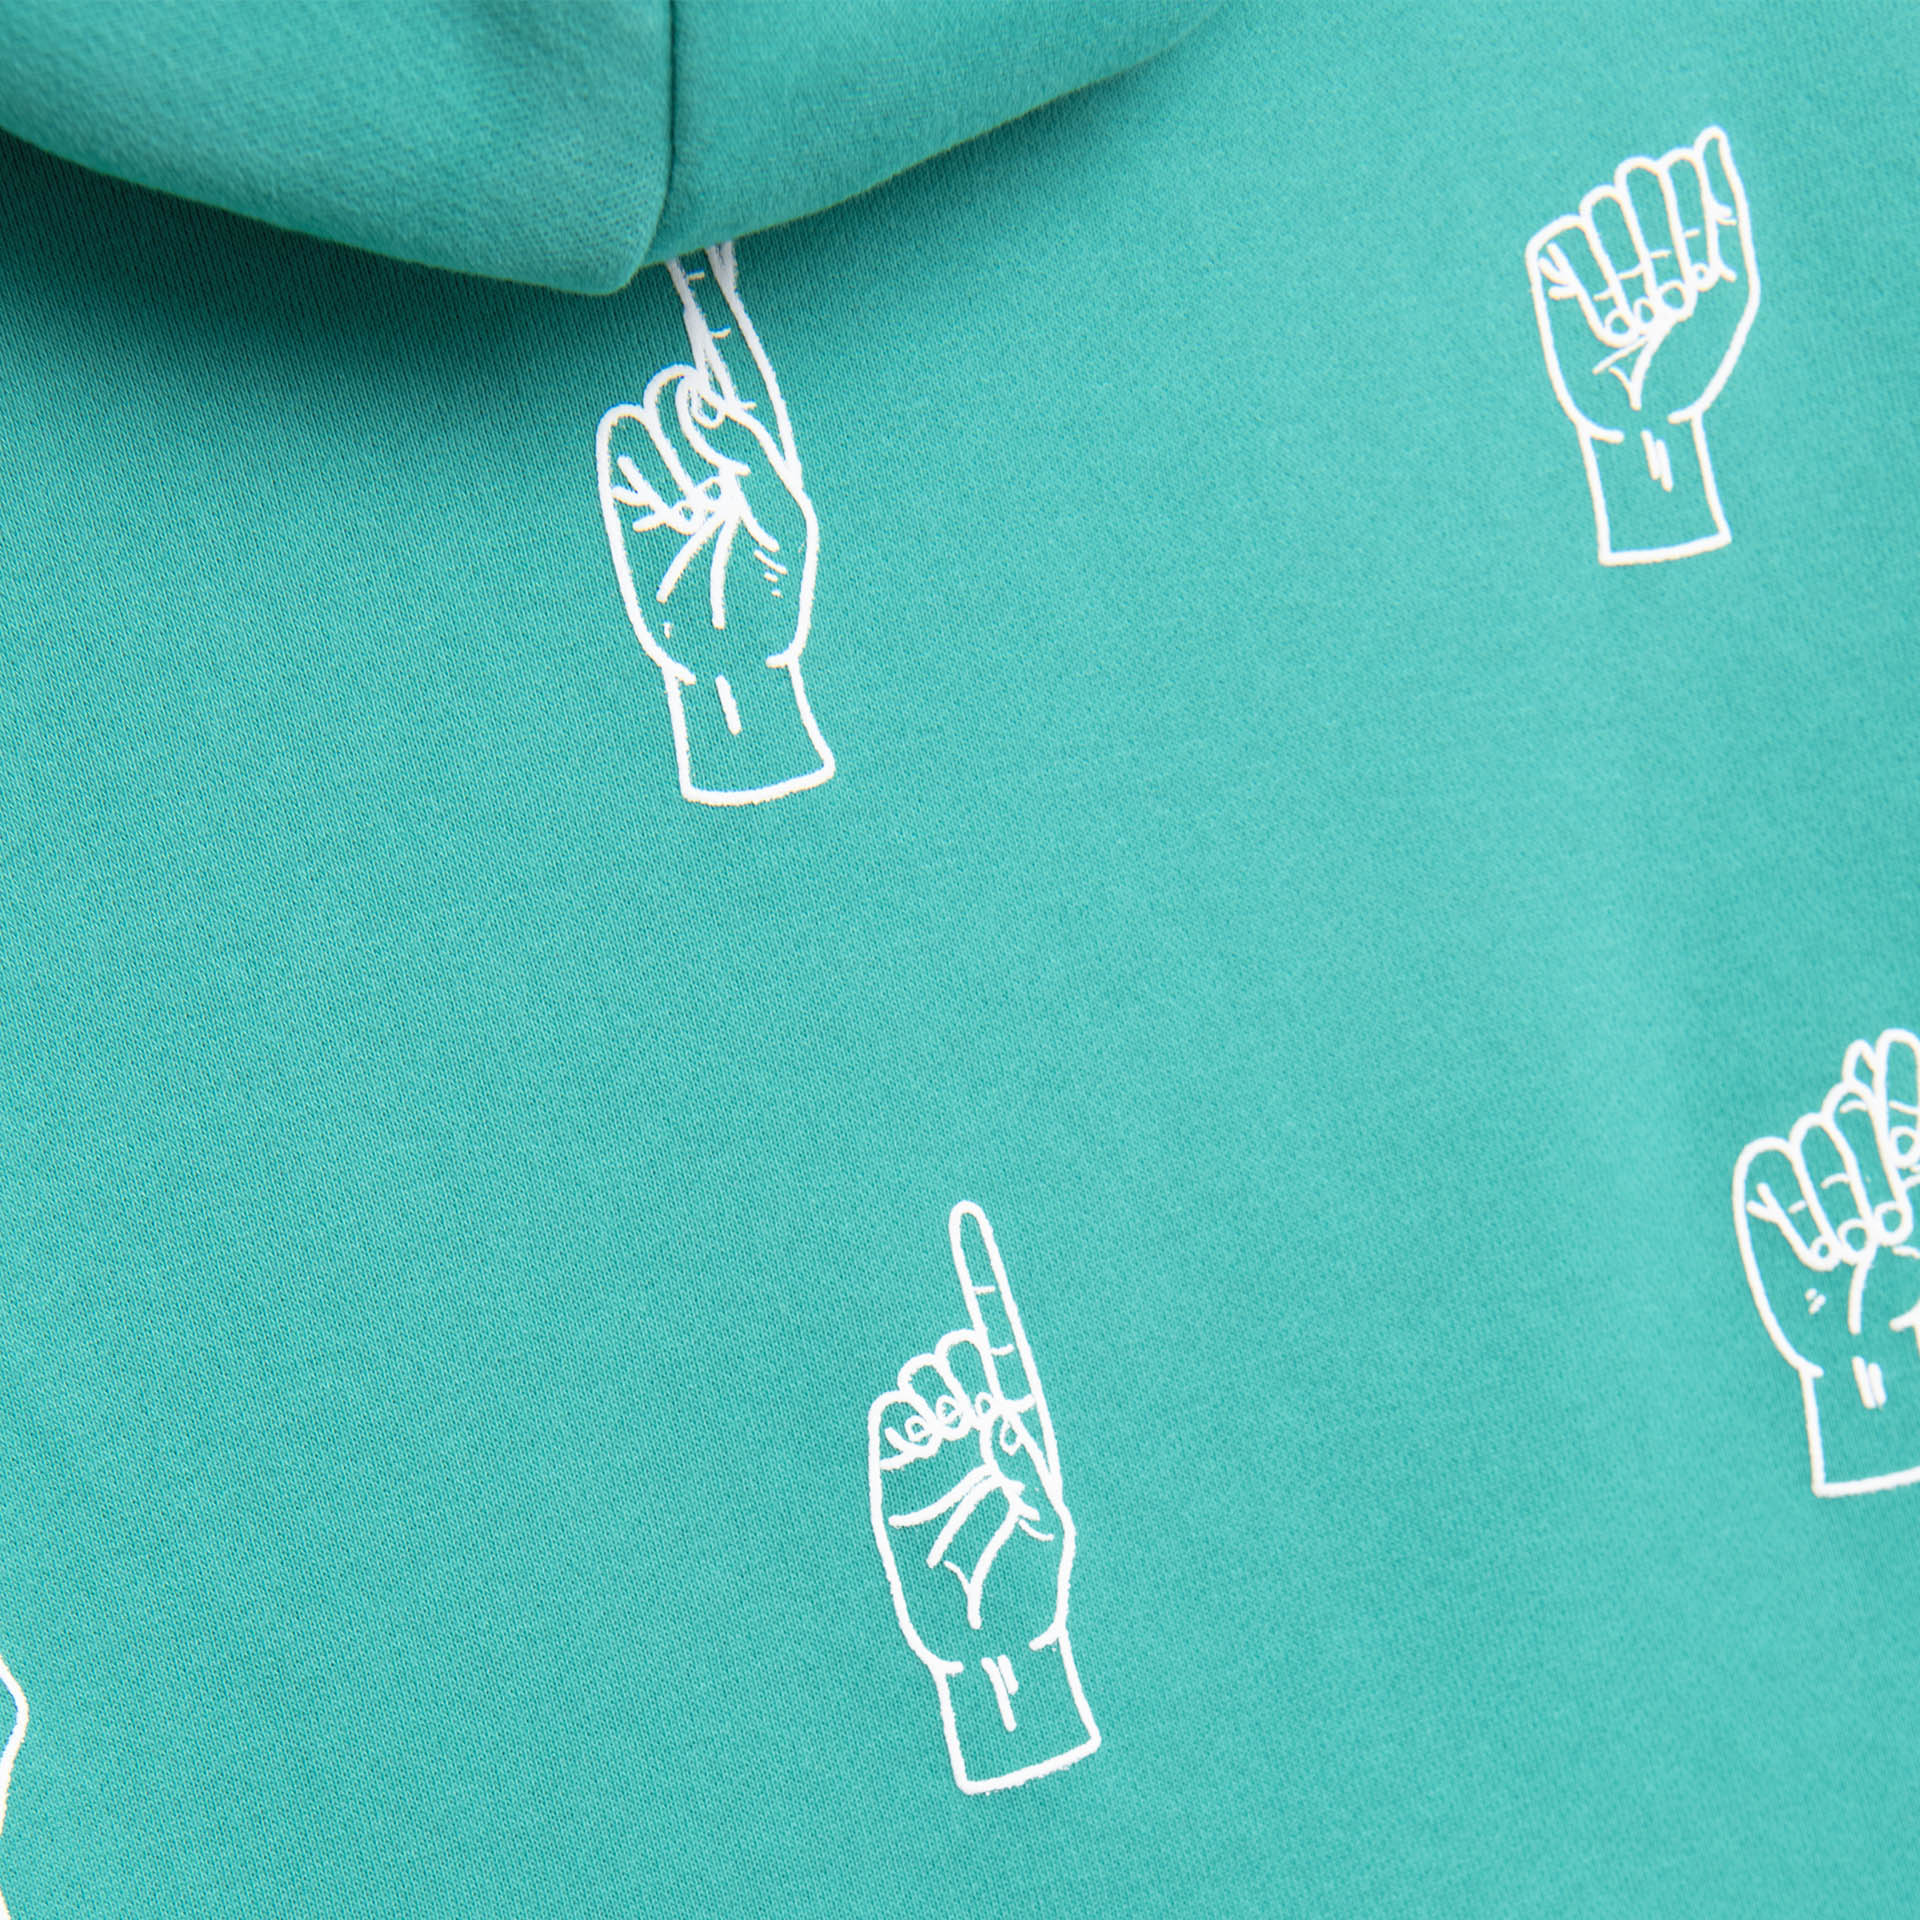 Light Sea Green Hoodie with Sign Language Print by Brandtionary